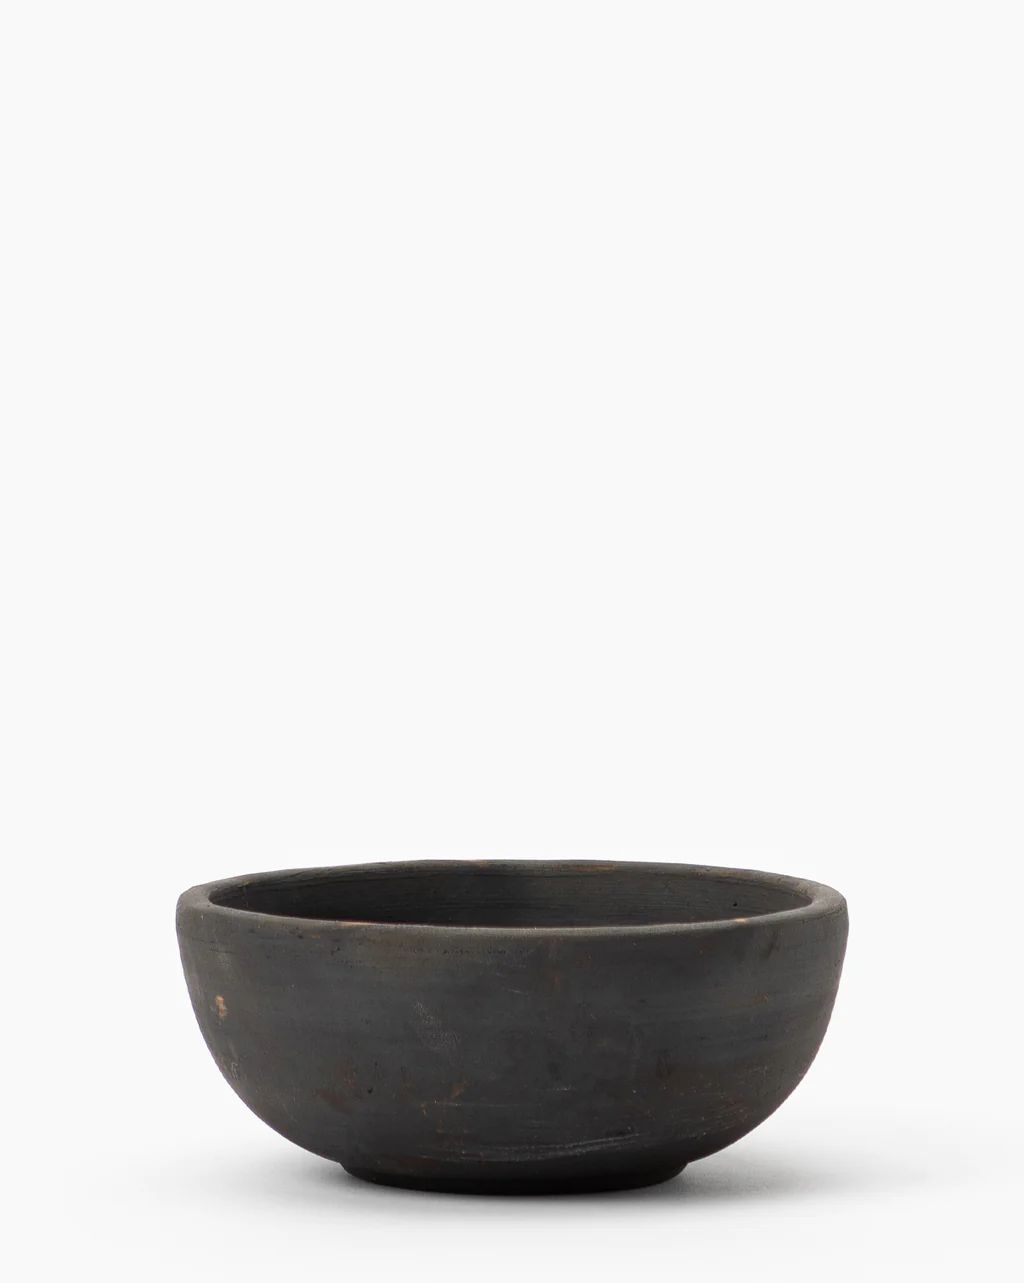 Ambrie Terracotta Bowl | McGee & Co.